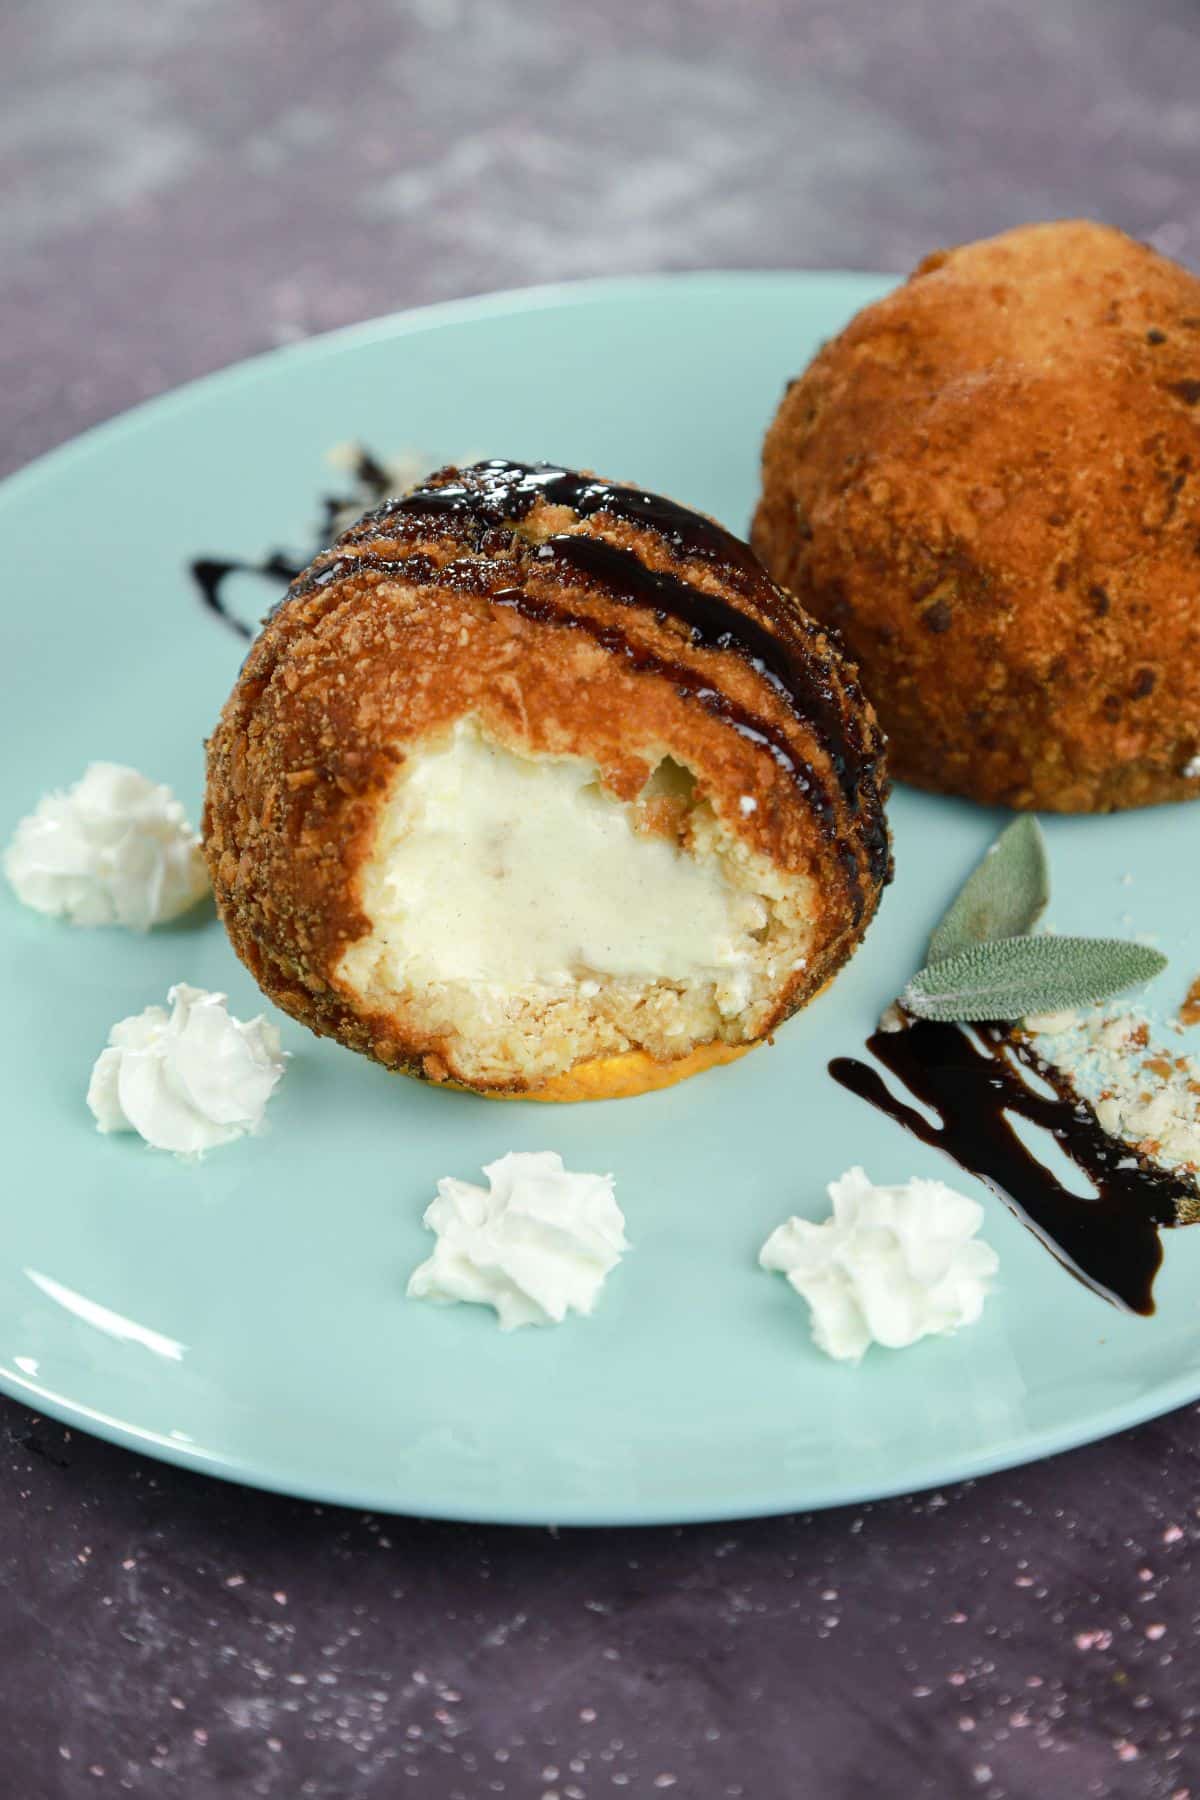 two fried ice cream balls on plate with syrup and whipped cream